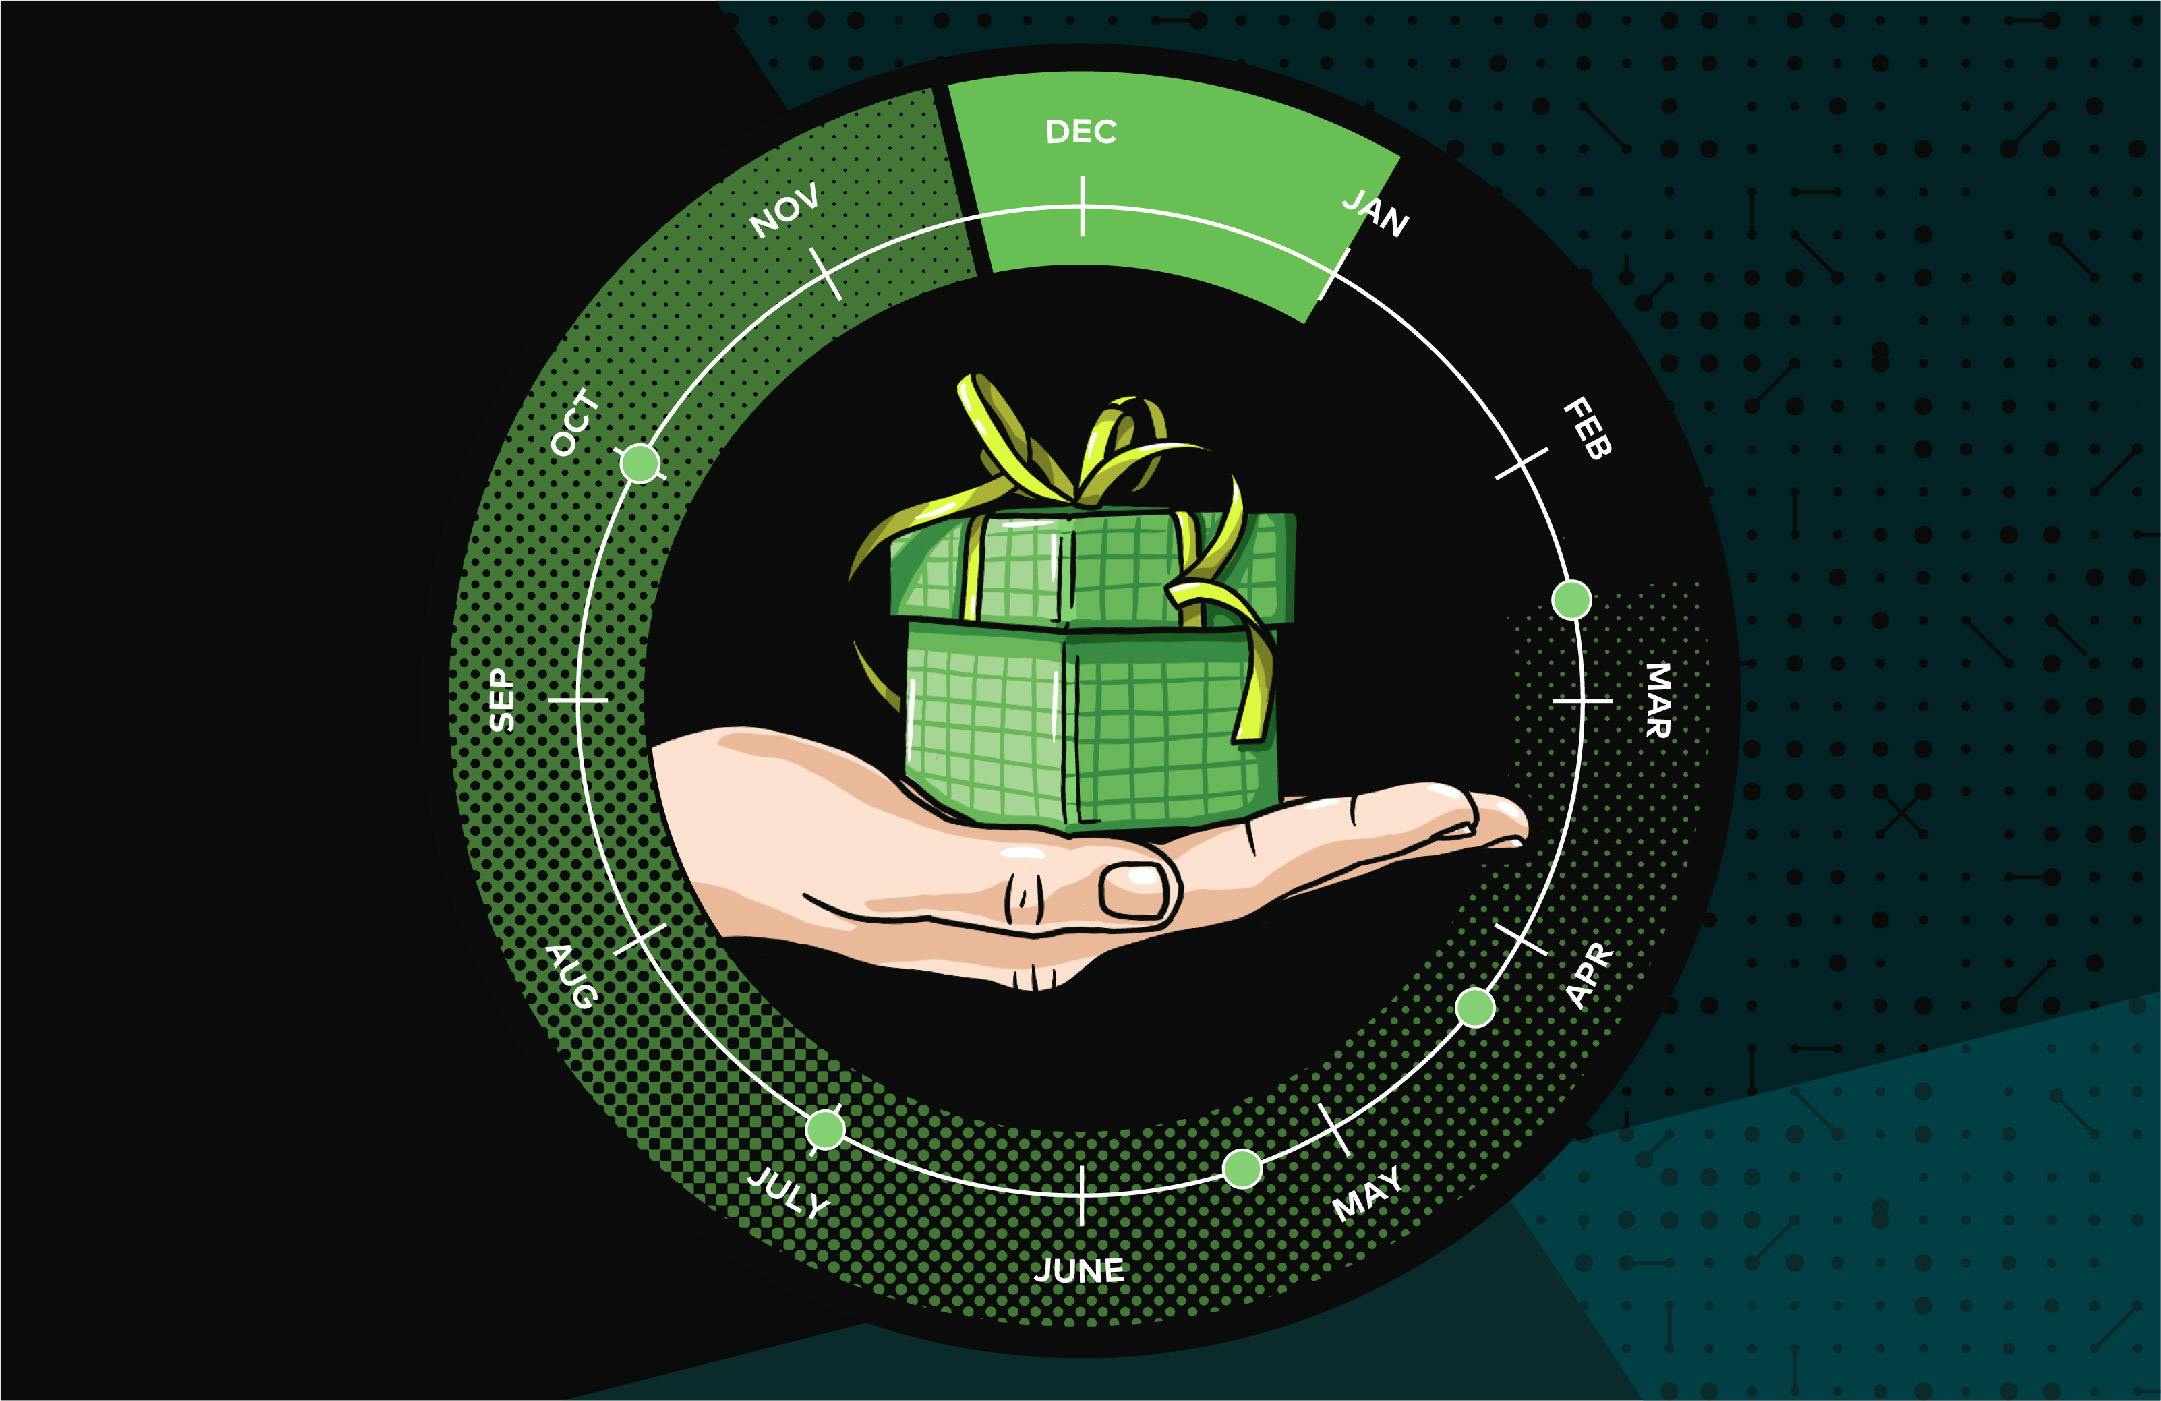 Illustration of hand holding a small green gift box